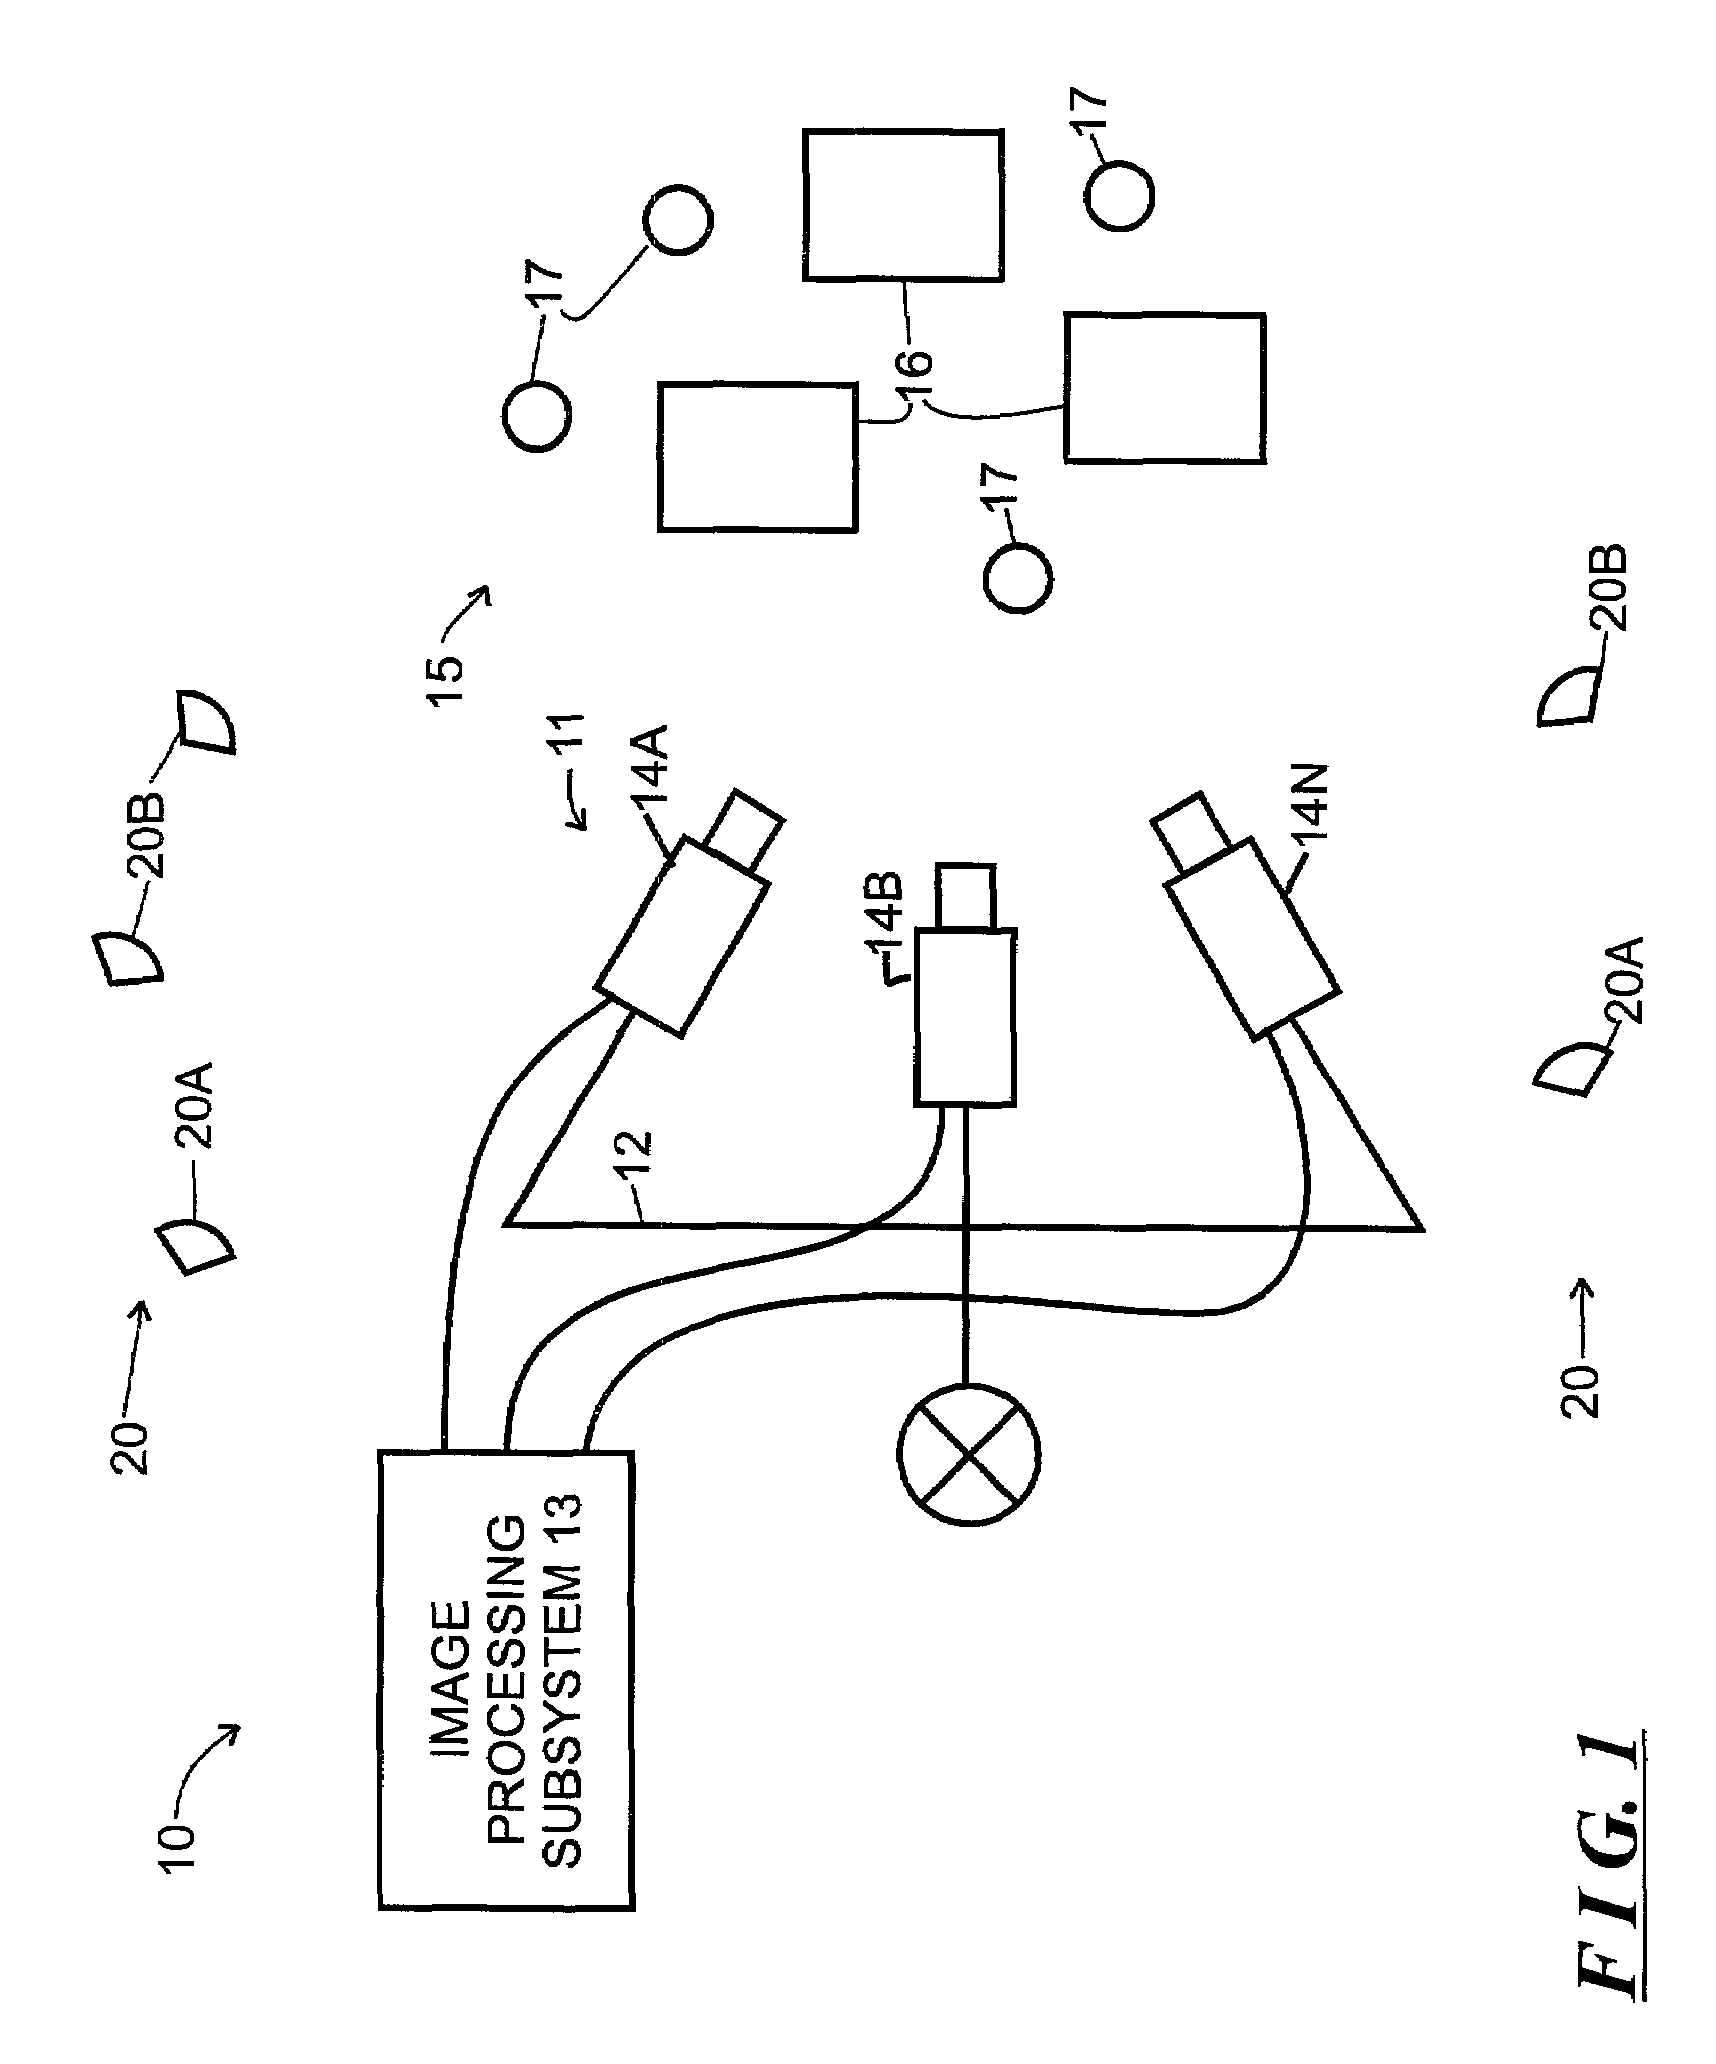 Method and apparatus for accurate alignment of images in digital imaging systems by matching points in the images corresponding to scene elements